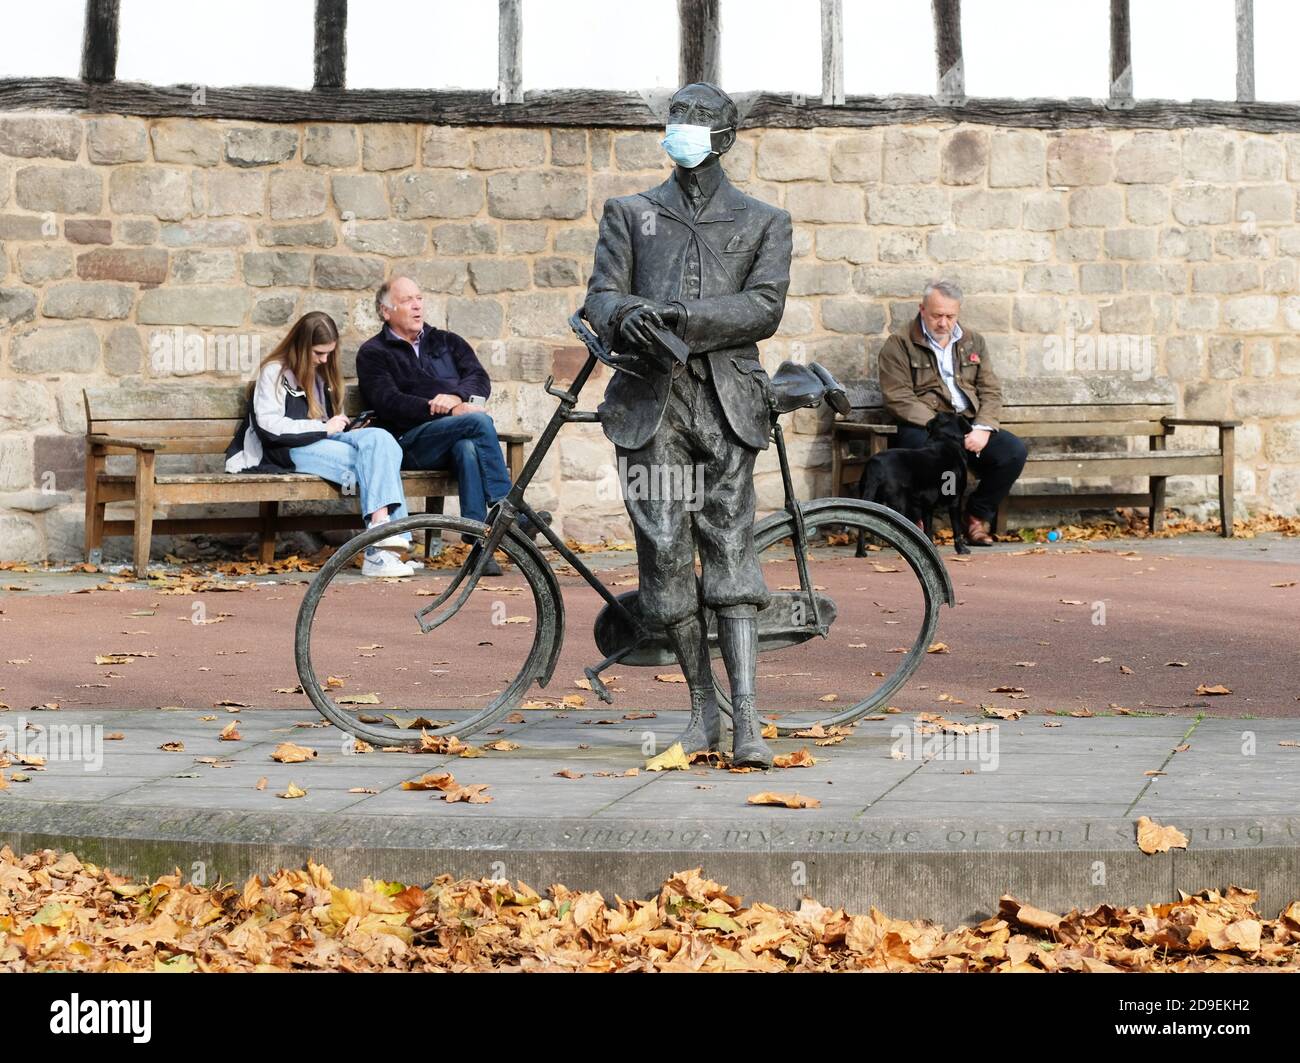 Hereford, Herefordshire, UK - Thursday 5th November 2020 - As England enters into its second Covid lockdown a protective faskmask has been added to the statue of composer Sir Edward Elgar on the Cathedral Green. Elgar lived in Herefordshire for many years. Photo Steven May / Alamy Live News Stock Photo